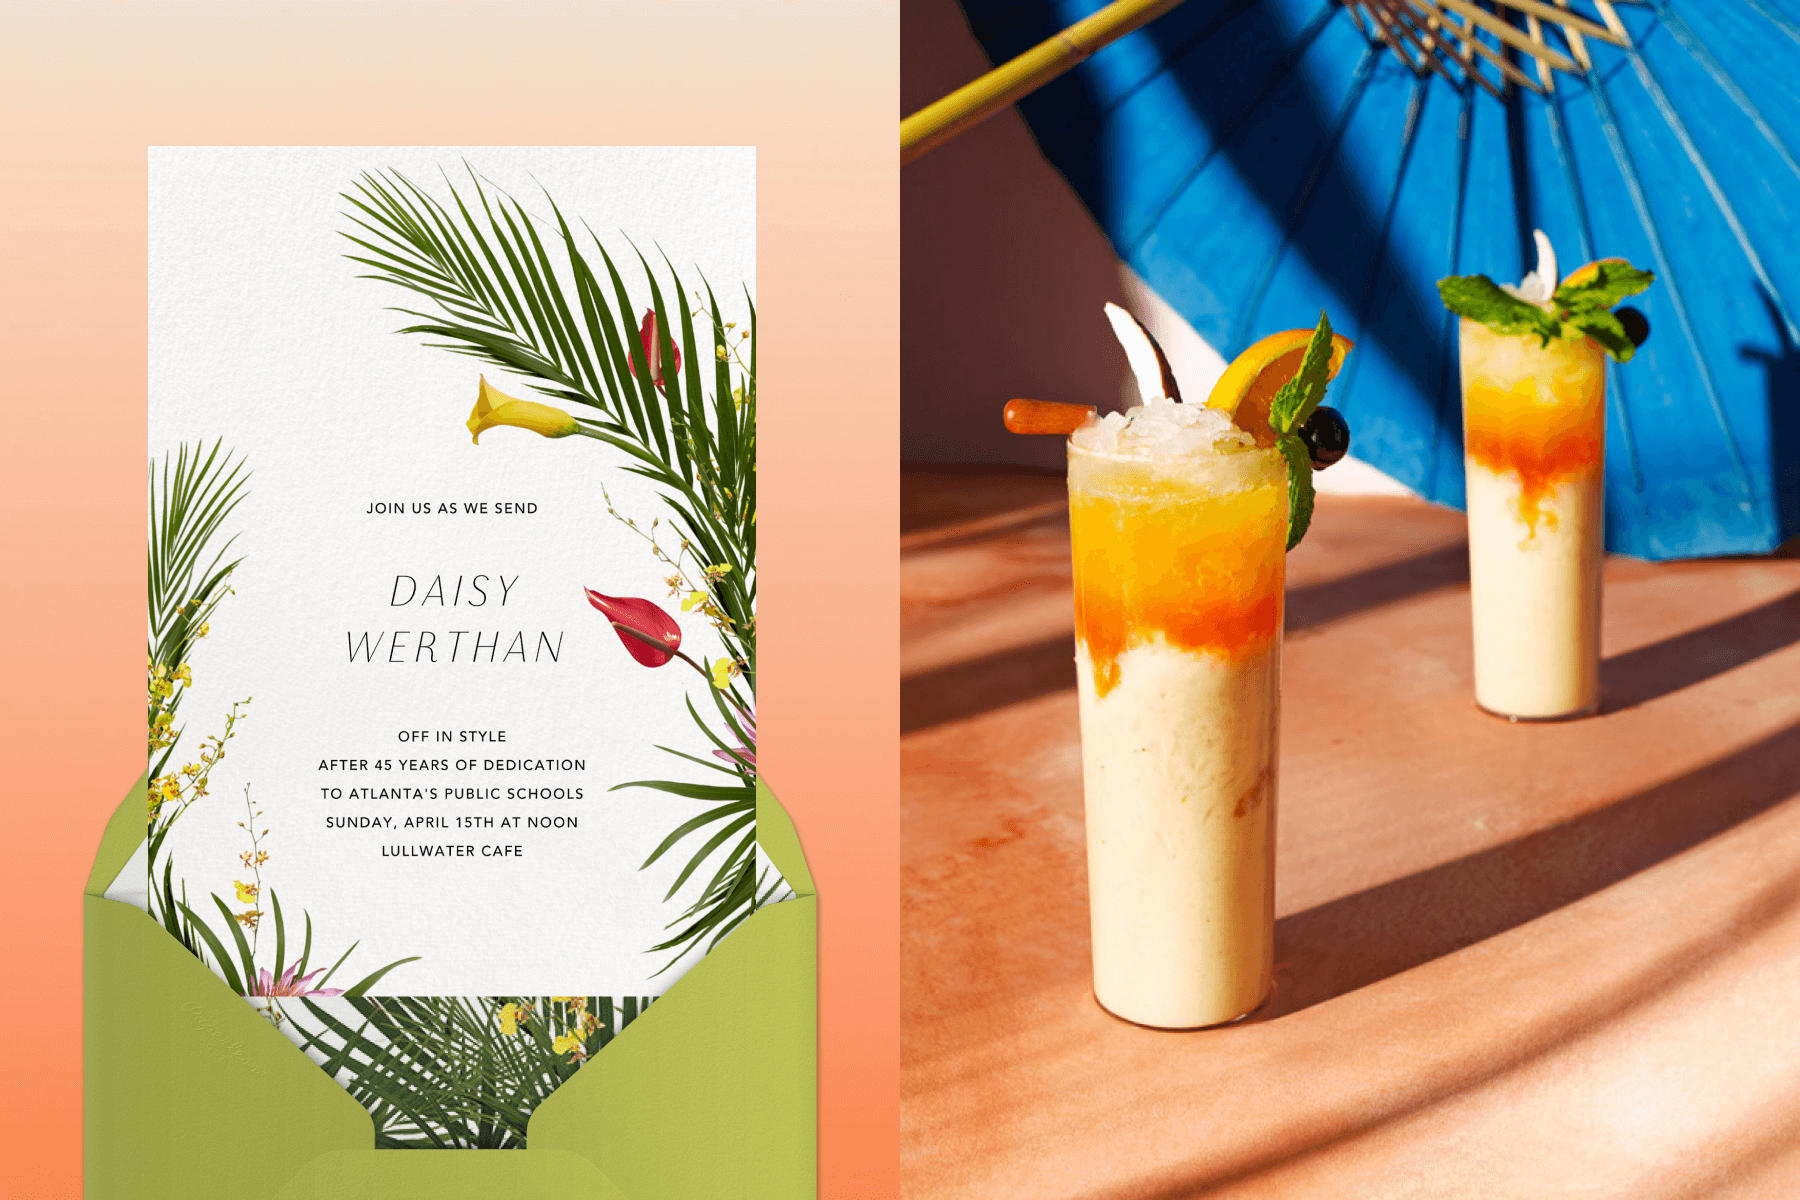 Left: A retirement party invitation with tropical fronds and flowers forming a loose border. Right: Two orange frozen tiki-style drinks are shaded by a blue parasol umbrella.